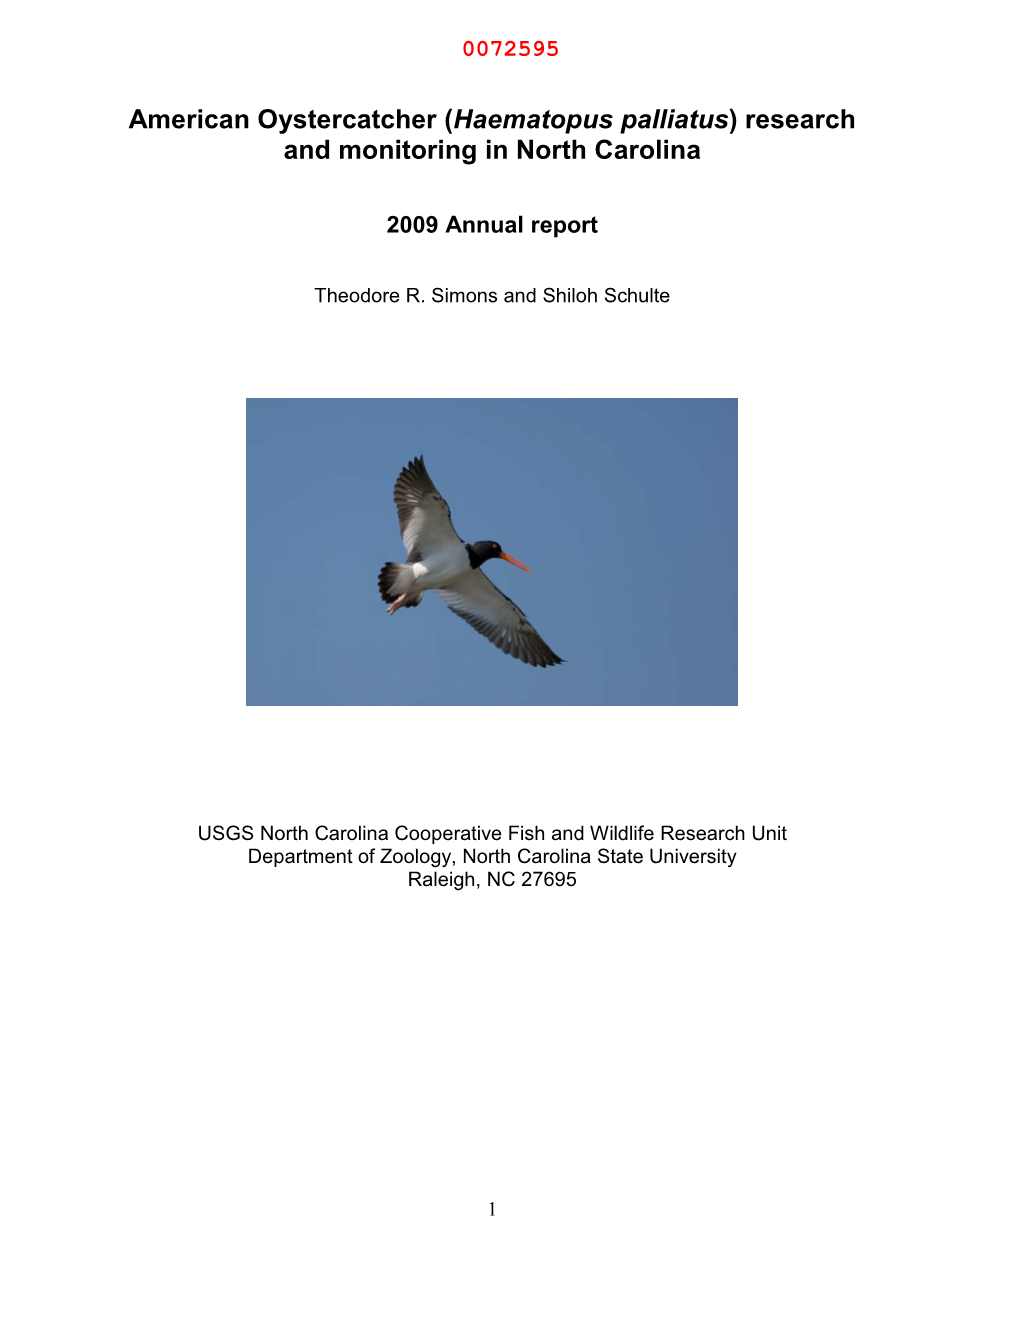 American Oystercatcher (Haematopus Palliatus) Research and Monitoring in North Carolina